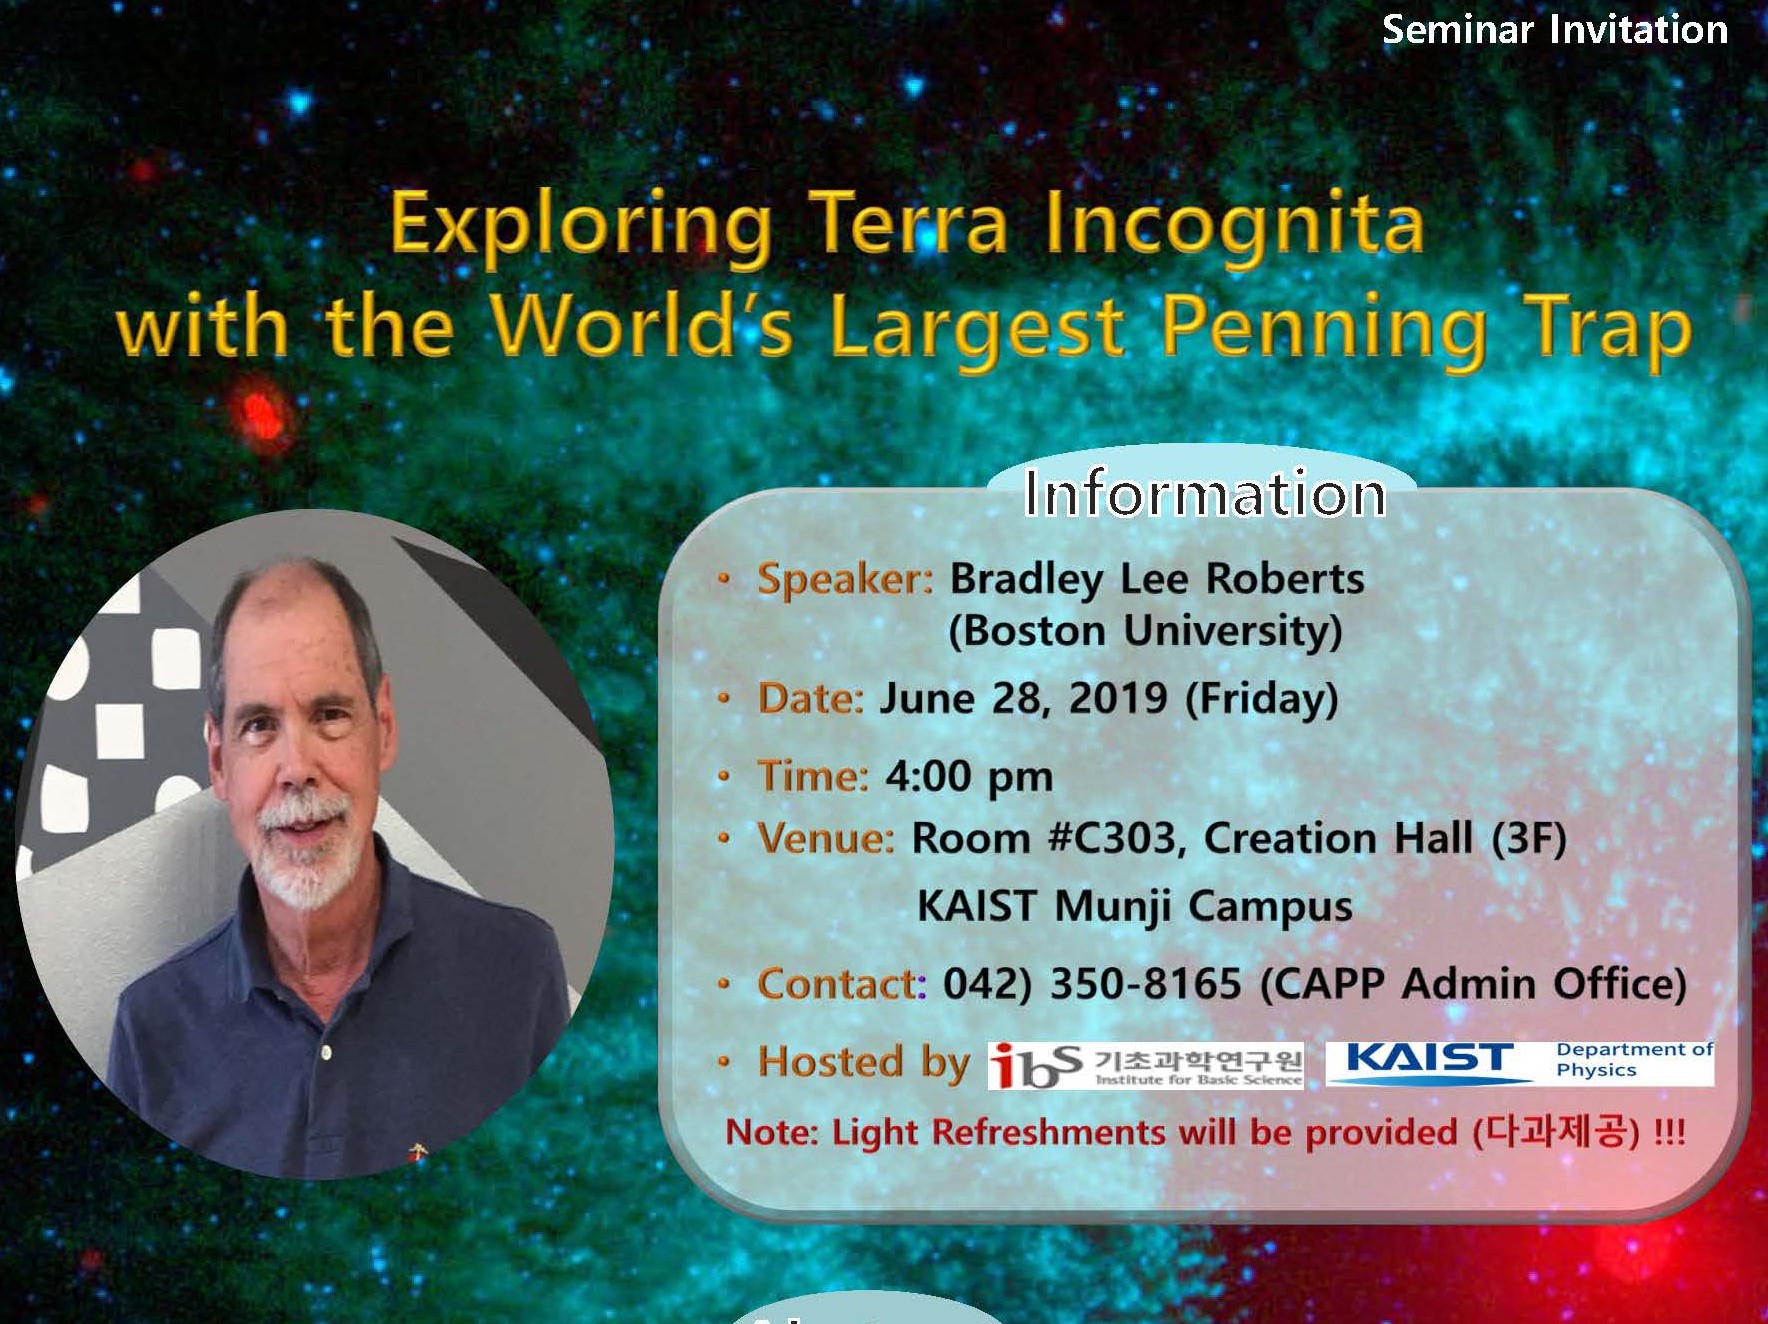 [CAPP 세미나] Exploring Terra Incognita with the World’s Largest Penning Trap